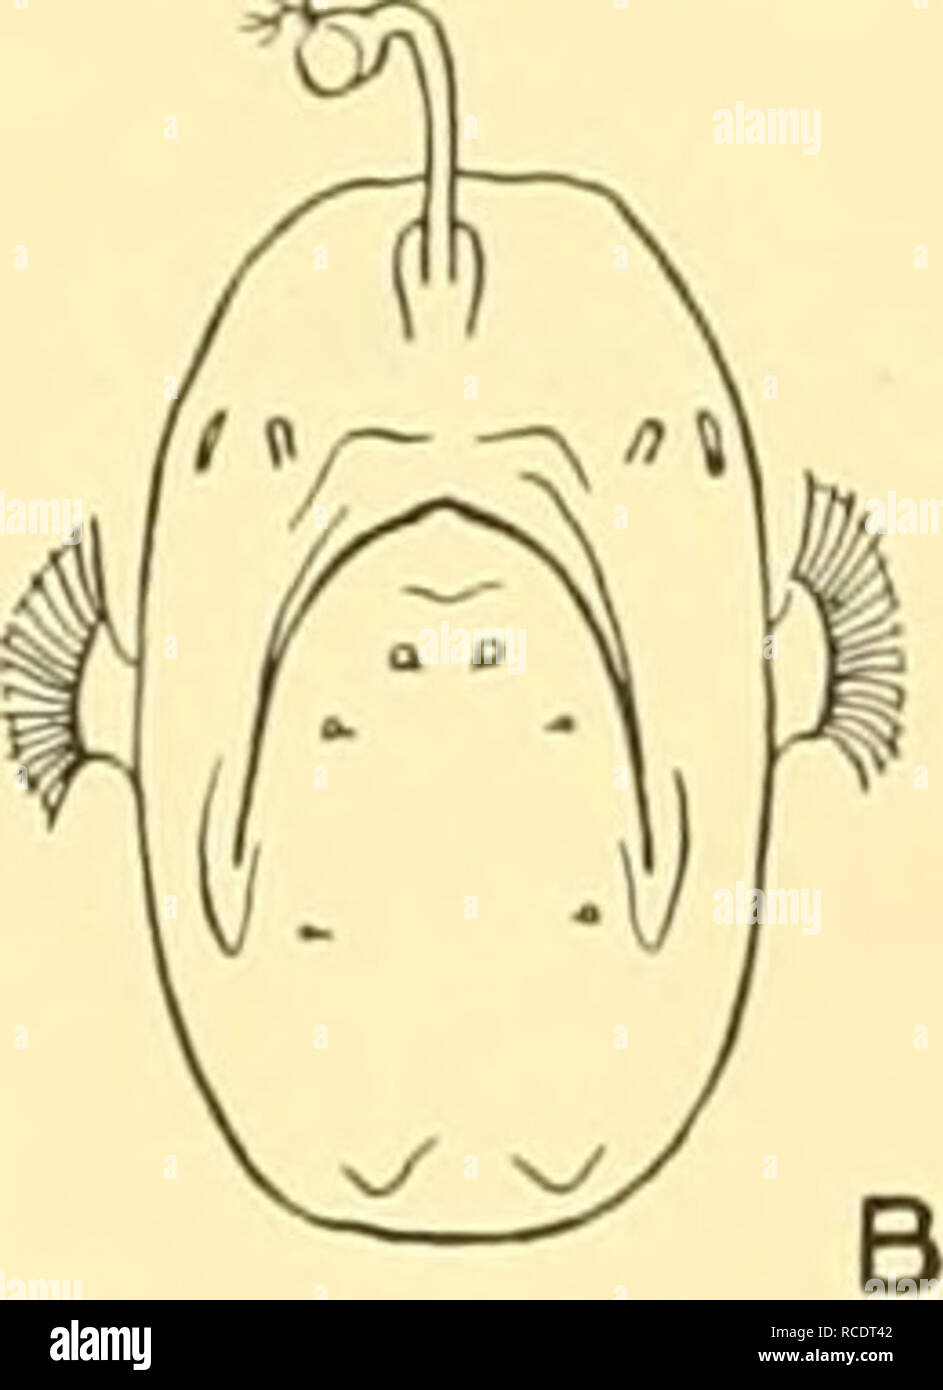 . Discovery reports. Discovery (Ship); Scientific expeditions. Fig. 44. Outline drawings of Cryptosparas couesii, showing the position of the papillae in the skin. A. Lateral view. B. Front view, (x i.) Mancalias uranoscopus (Giinther, 1878). Regan, t.c. p. 37, text-fig. 21. St. 293. 24. viii. 27. 4° 18' 15&quot; N, 16° 51' 00&quot; W. Young-fish trawl, 100-120 (-0) m.: 2 speci- mens, 28-30 mm. 28. X. 25. 13° 25' N, 18° 22' W. 4I m. net, horizontal, 900 (-0) m.: i specimen, 70 mm. Hab. Atlantic; Hawaiian Islands. Mancalias tentaculatus, n.sp. St. 114. 12. xi. 26. 52° 25' 00&quot; S, 9° 50' 00& Stock Photo